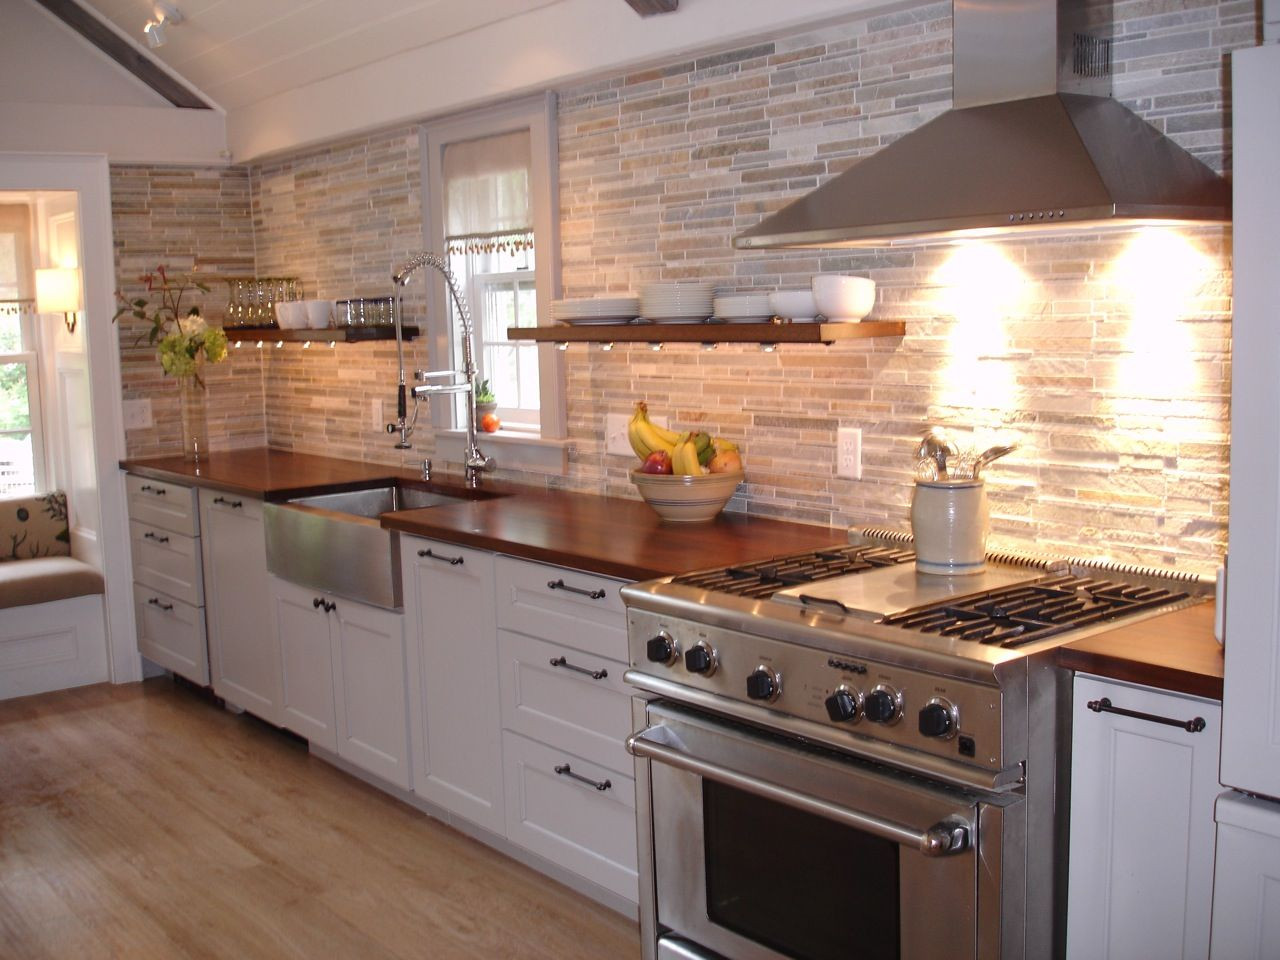 Kitchen Counter Top Ideas
 How To Choose A Wood Countertop For Your Kitchen